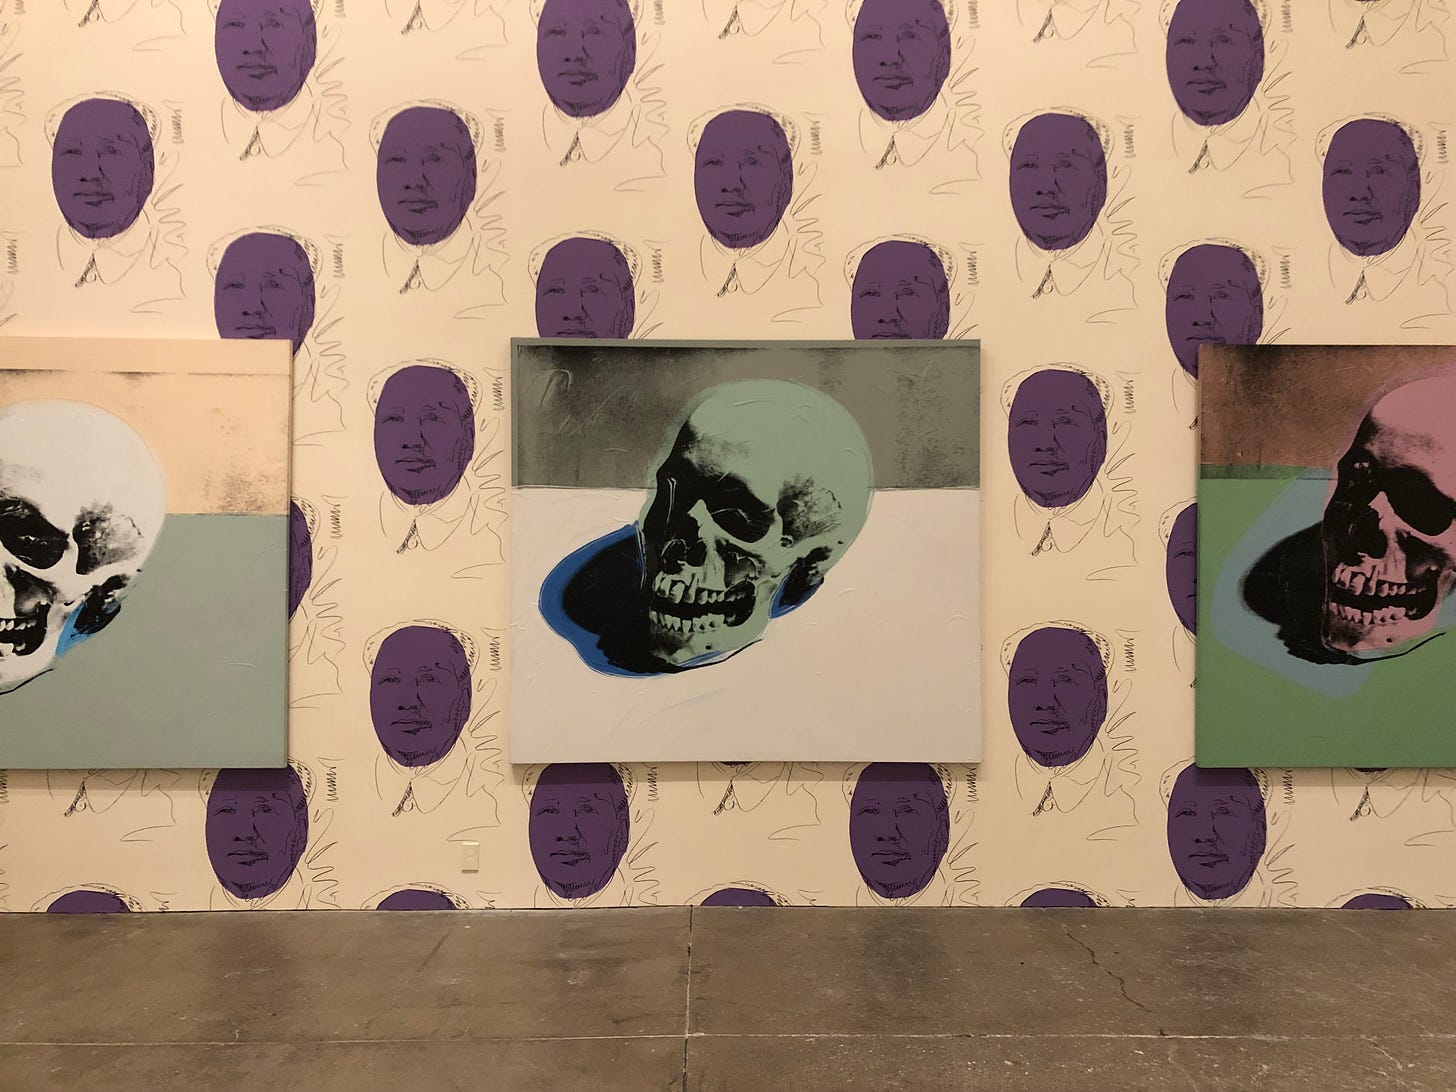 Three large paintings of skulls (white, sea green, and pale pink) are hung on a wall full of faces of Chairman Mao highlighted in purple. The works are by Andy Warhol.